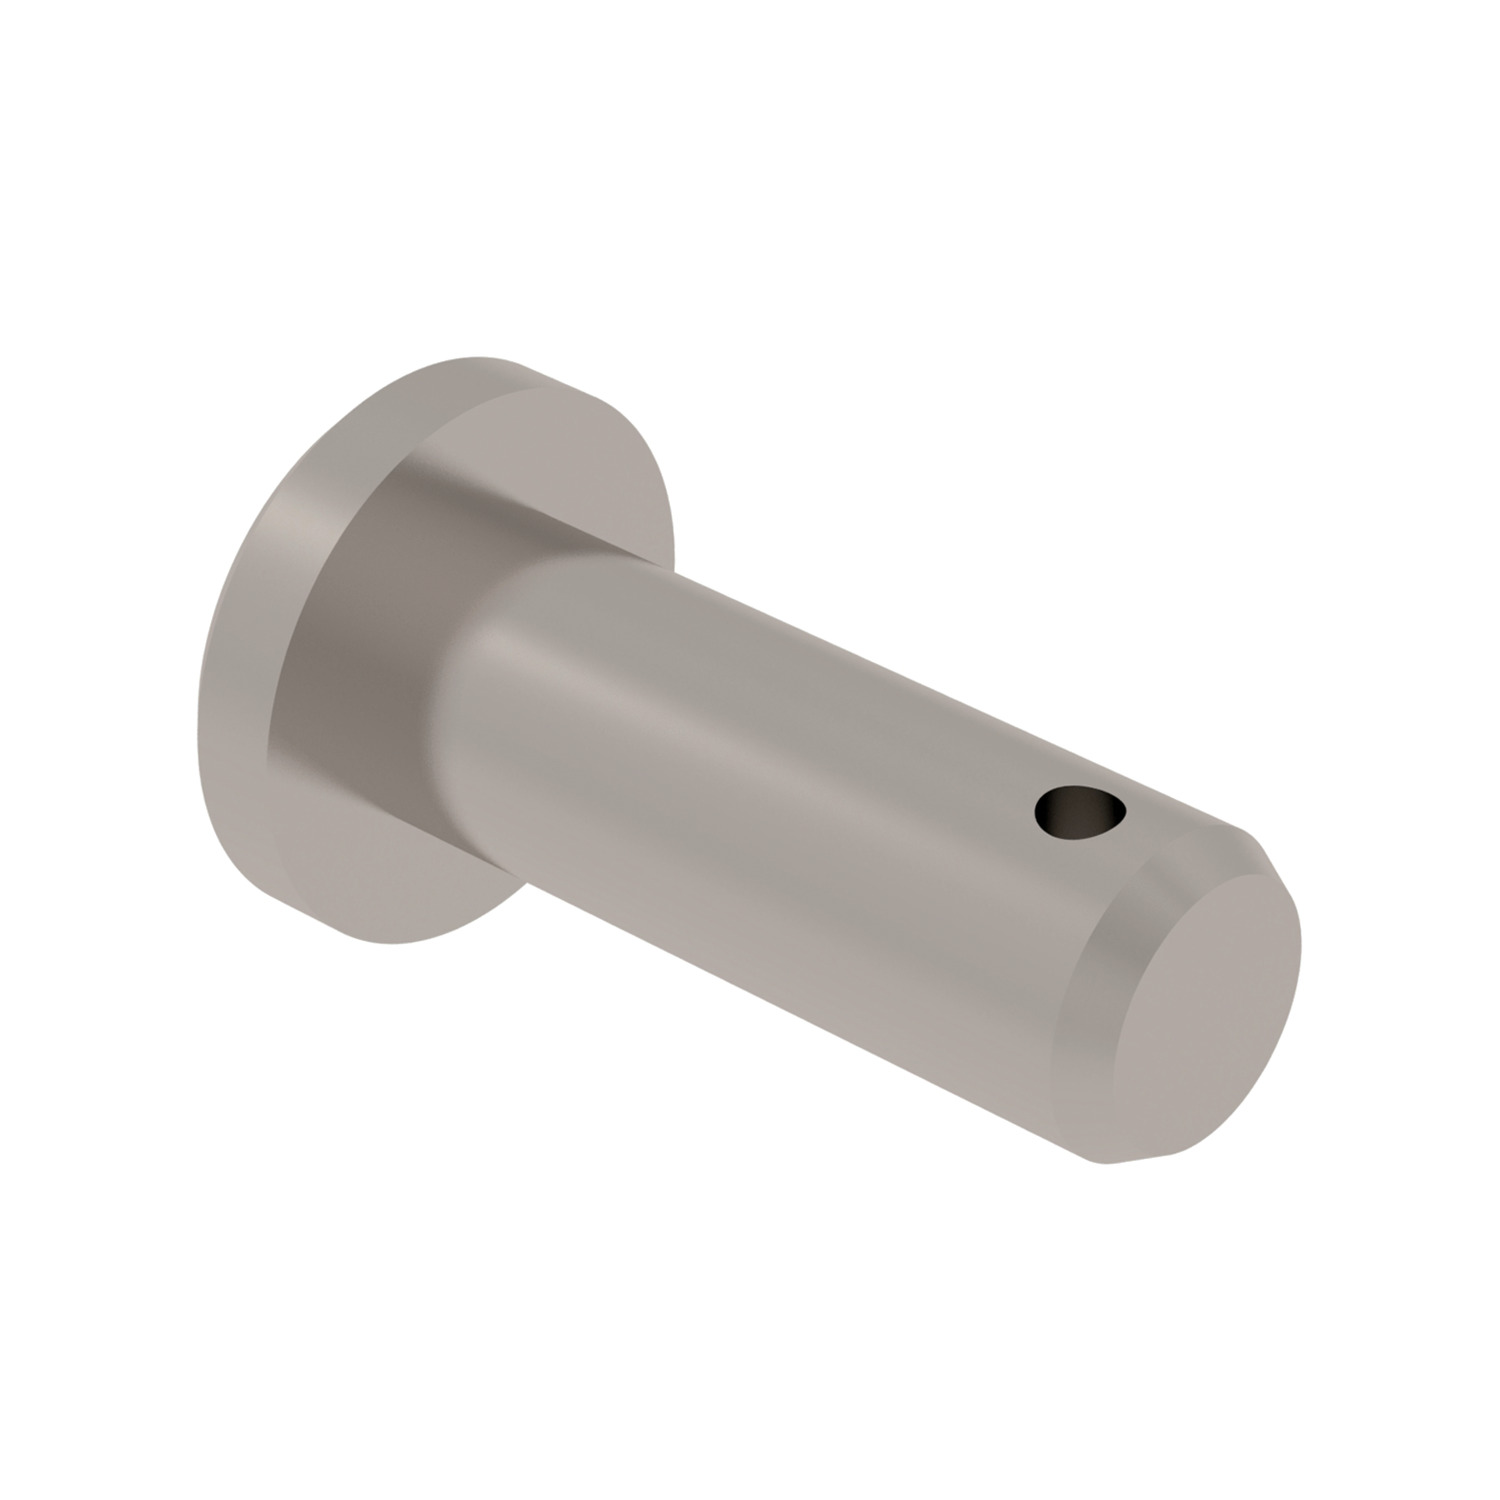 Steel Clevis Pin With Hole Clevis pins with hole. Designed for use with clevis joints. Made from steel.